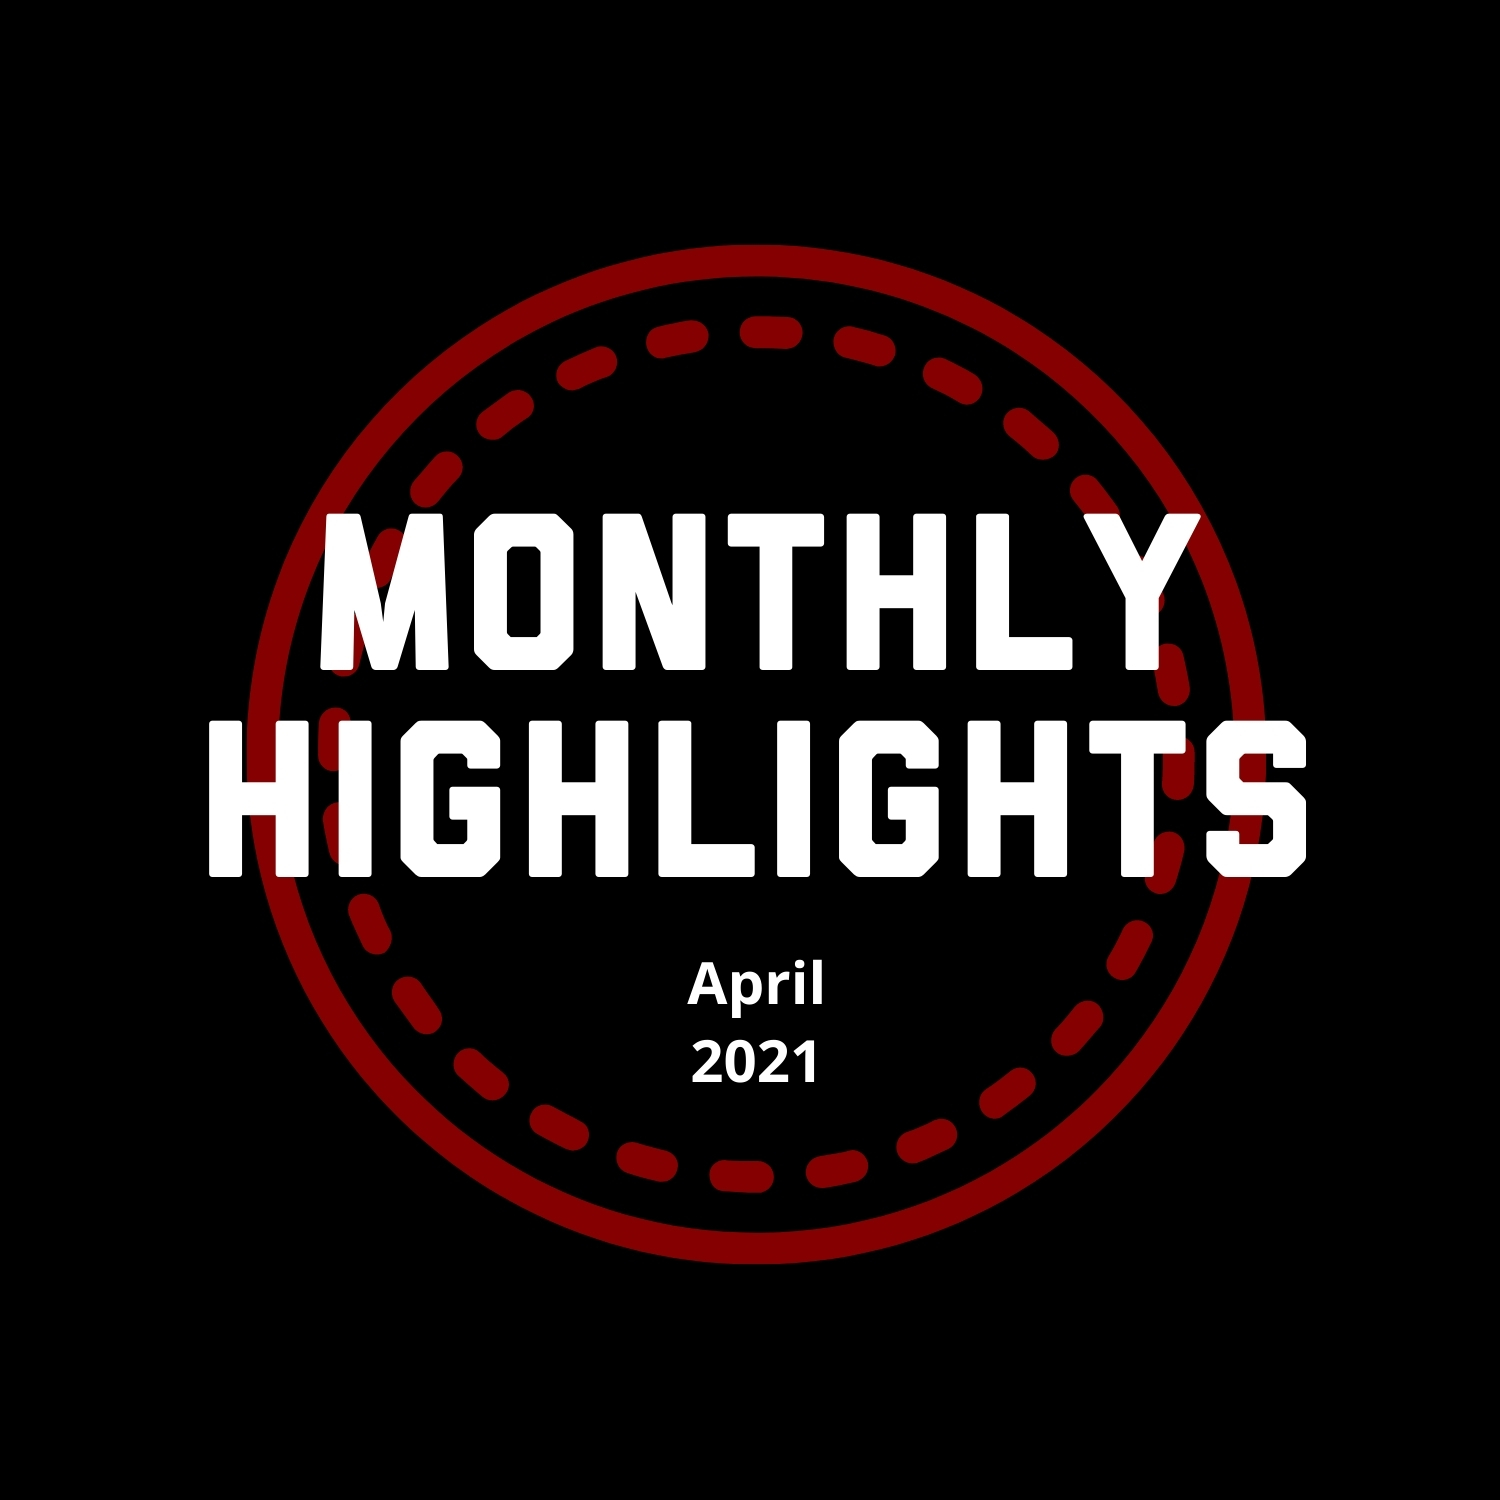 Monthly Highlights April 2021